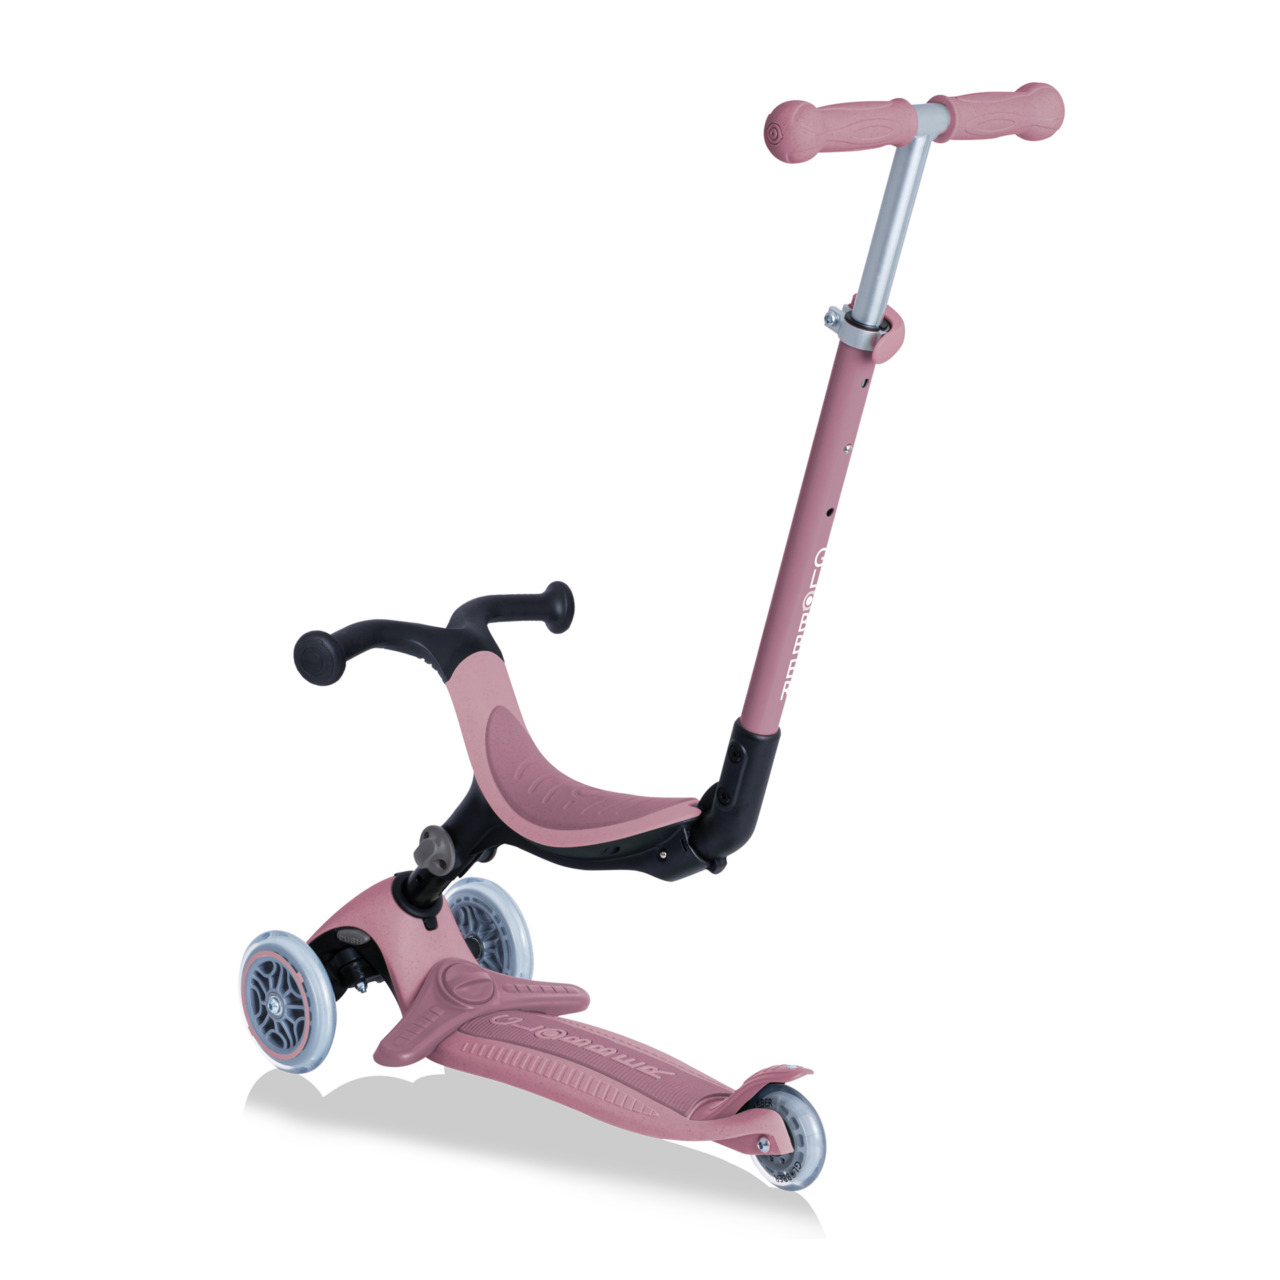 694 510 Eco Folding Scooter With Seat